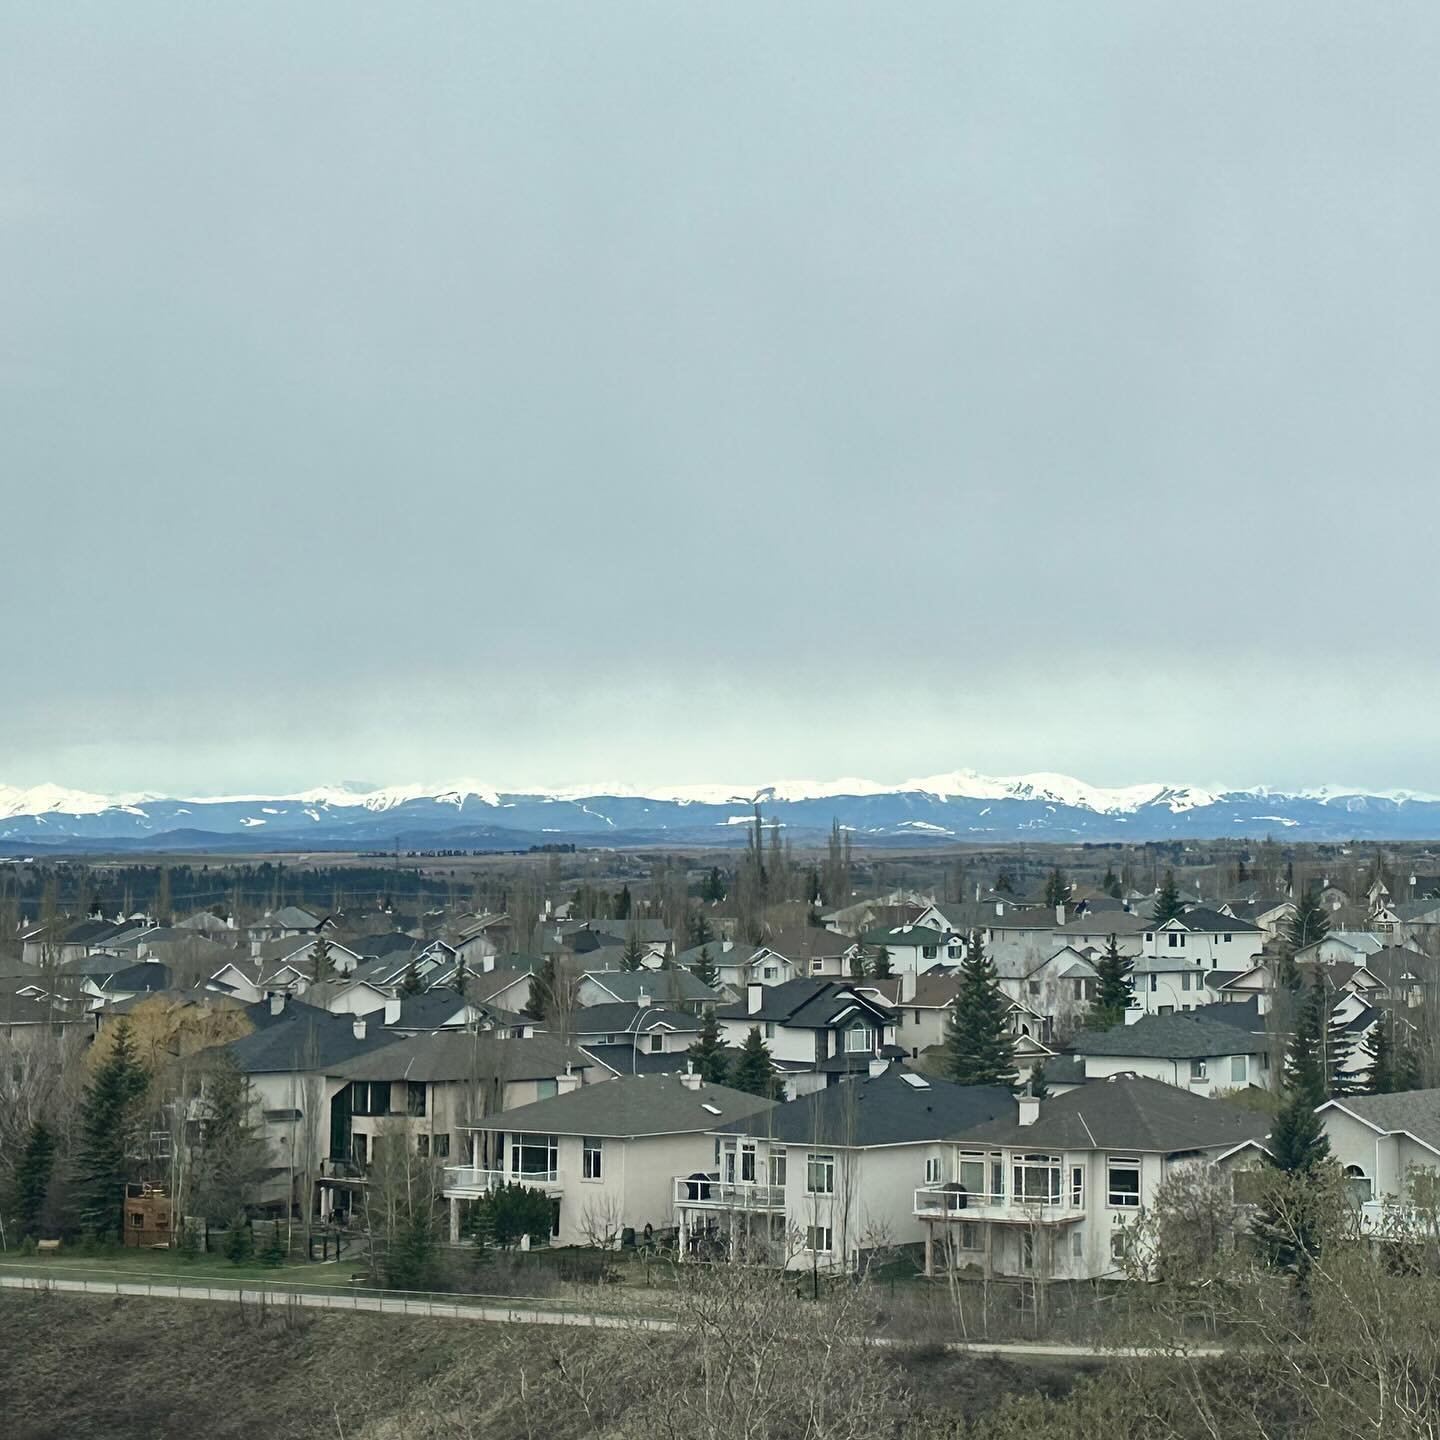 Even on a cloudy day the view is simply stunning!

Full view of the Rockies from the dining room of this beautiful condo in Tuscany&rsquo;s Villa D&rsquo;Est!

Great staging consultation this morning preparing this property for sale.

New kitchen, ta